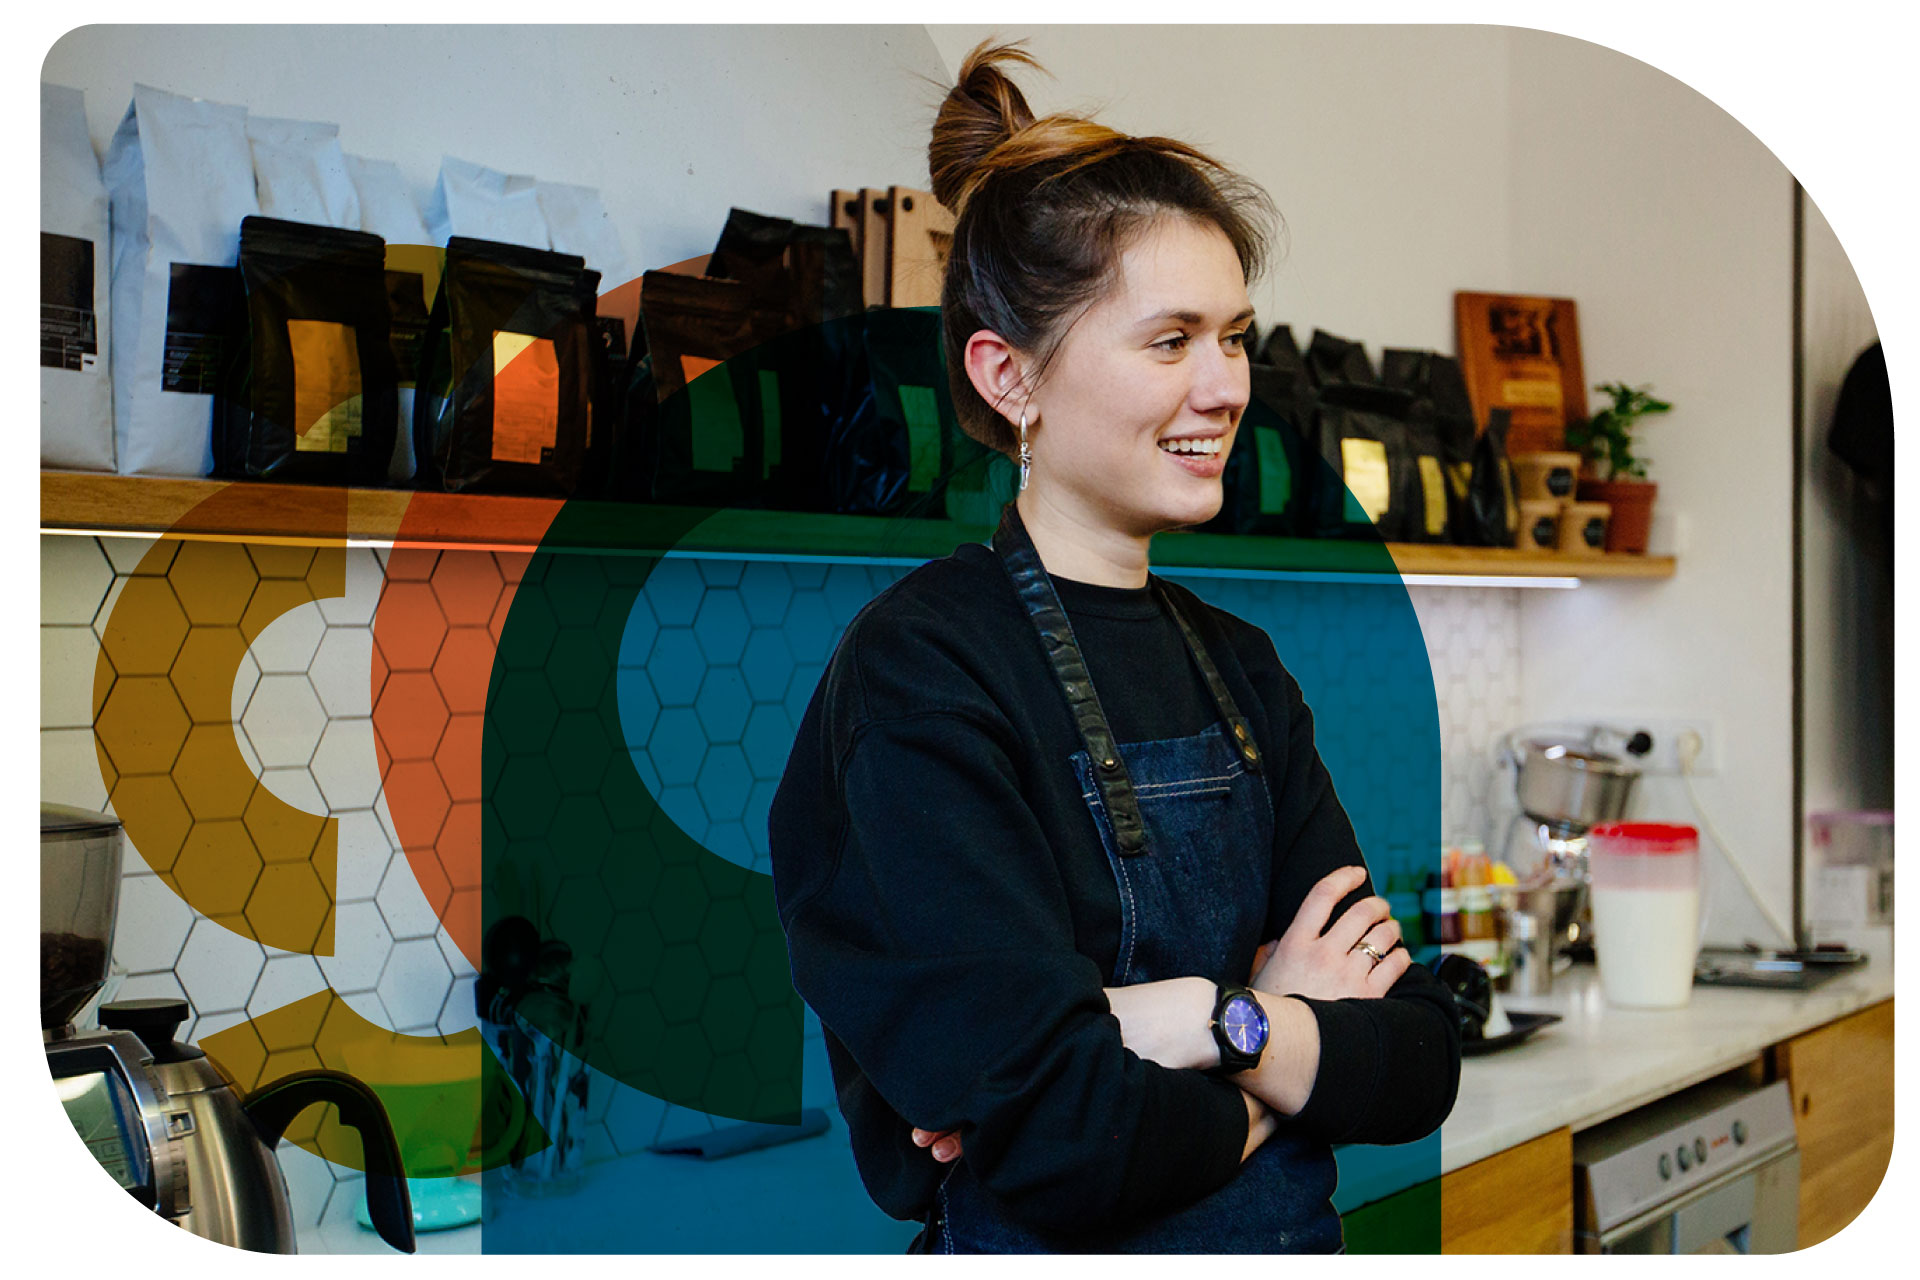 A woman with her hair tied up with silver drop earrings and wearing an apron is standing up against the counter of what appears to be a coffee shop. The shelf behind her has coffee bags lining the entire shelf. She is looking off camera and smiling with her arms crossed.